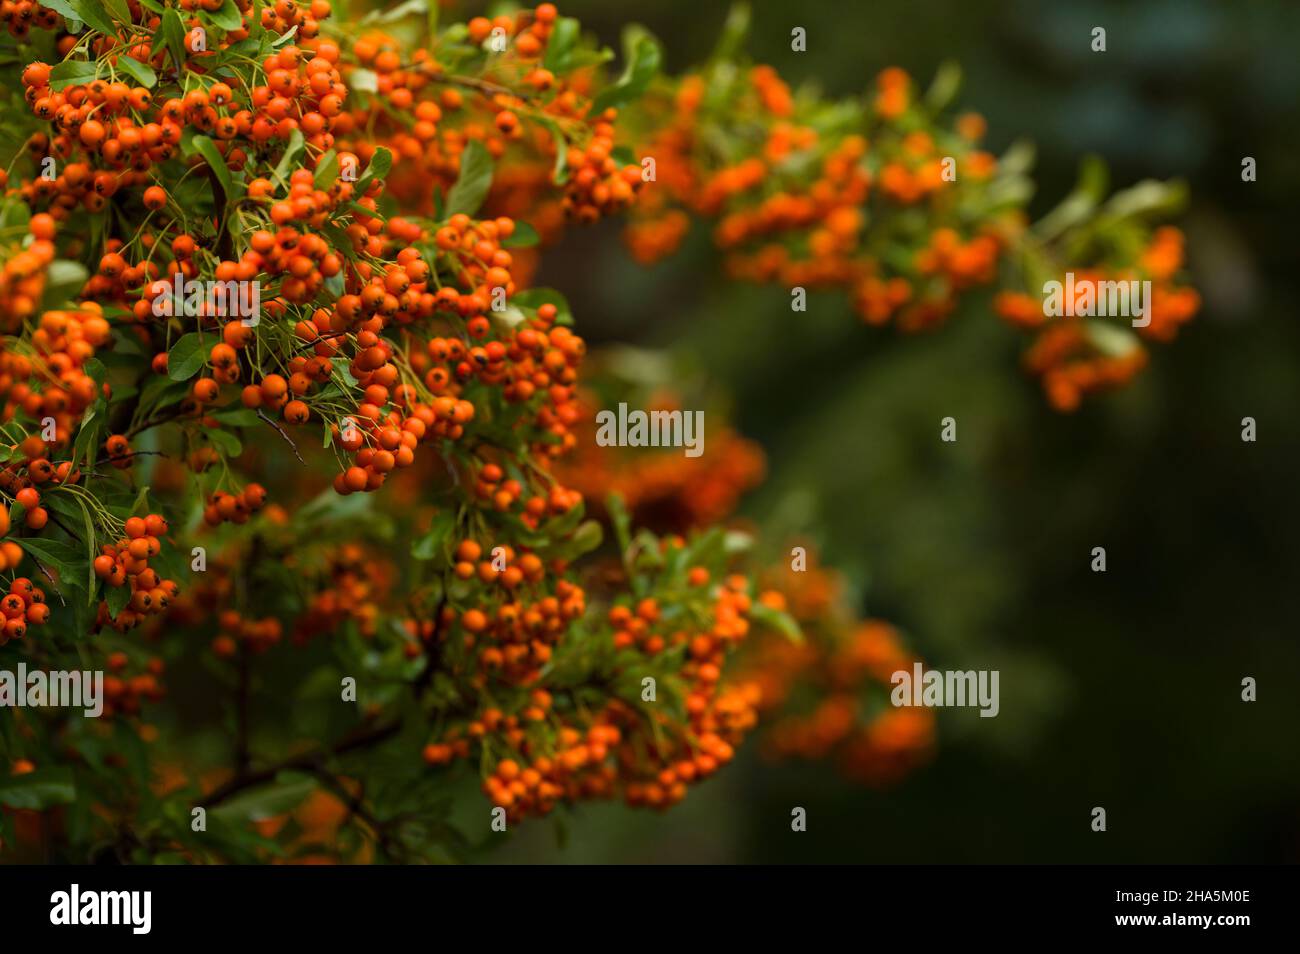 the orange fruits of the firethorn (pyracantha) glow in autumn,germany Stock Photo